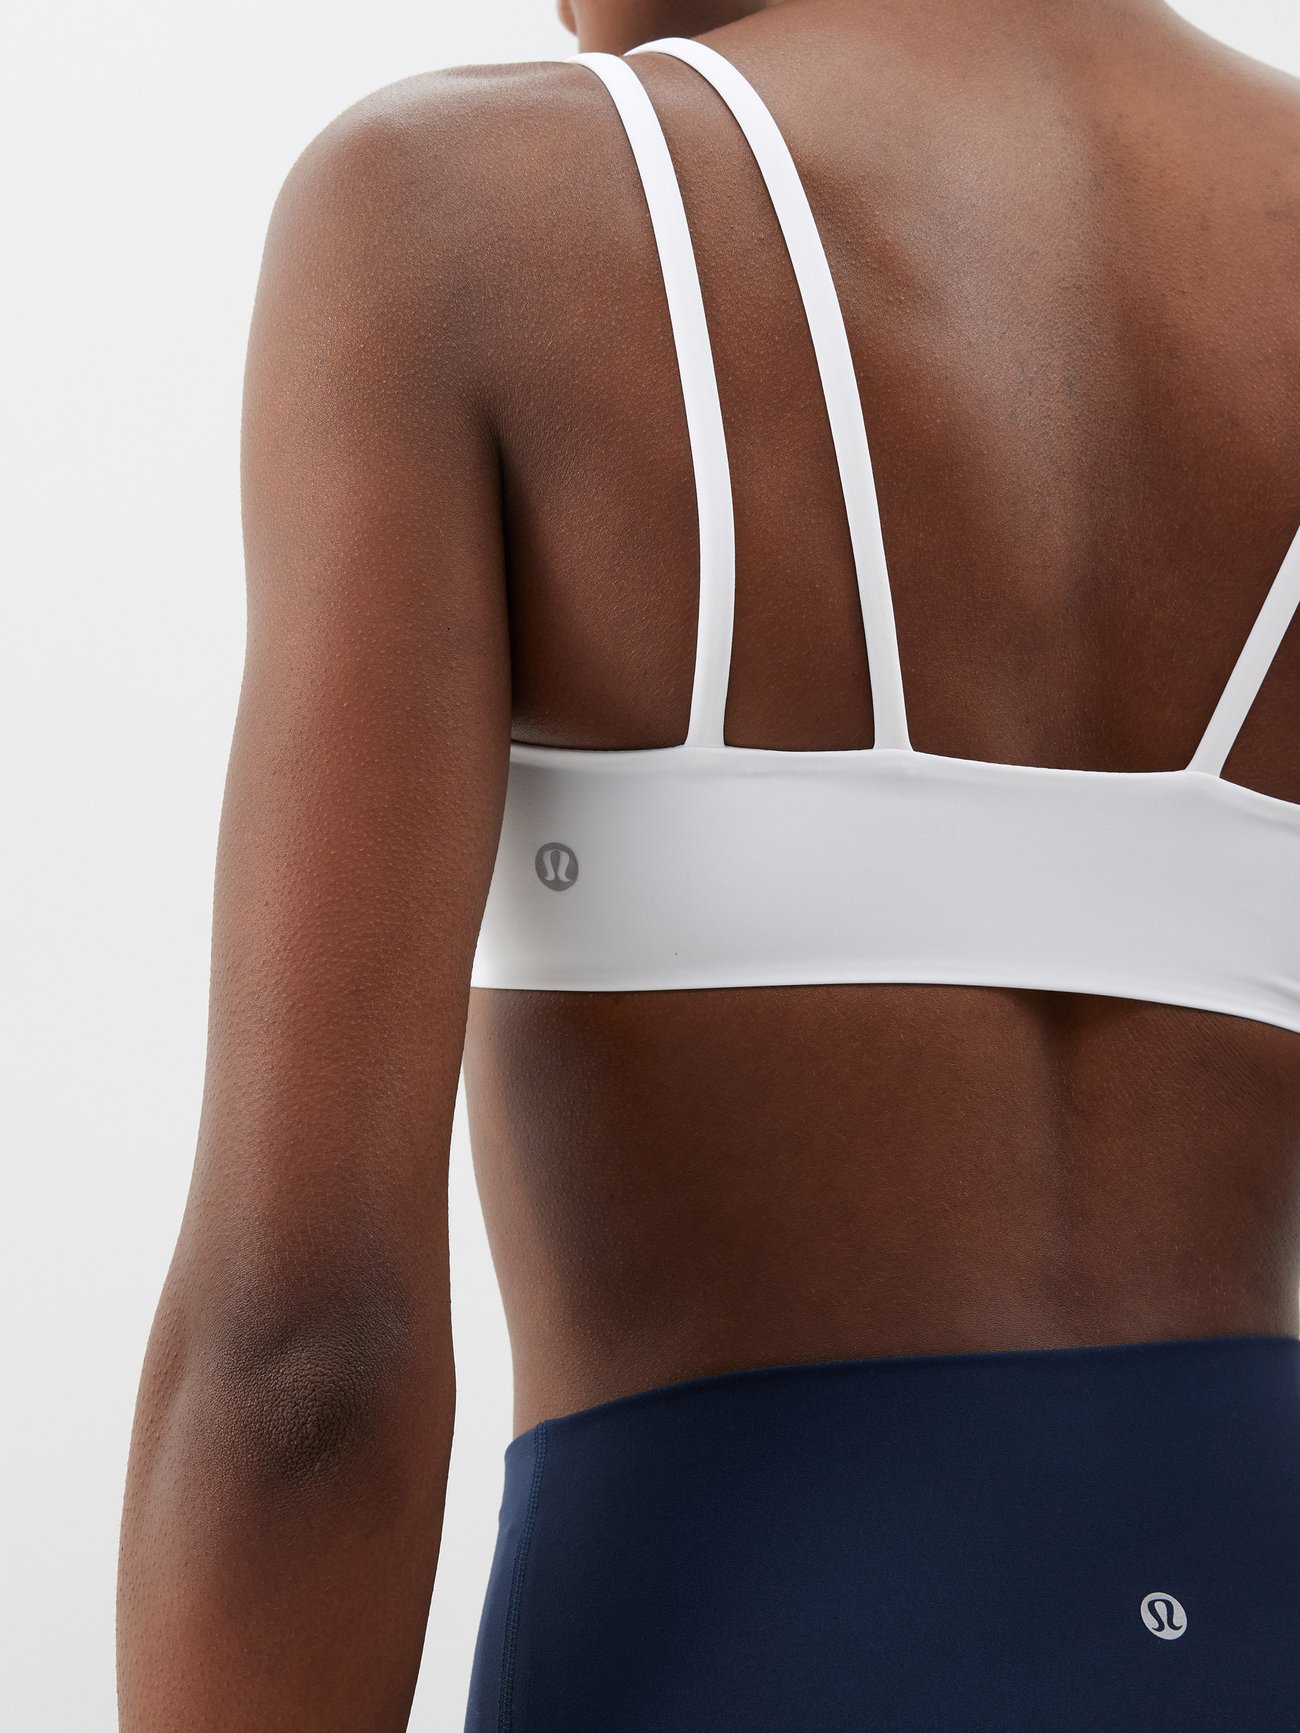 Lululemon Like a Cloud Bra High support vs Low support 